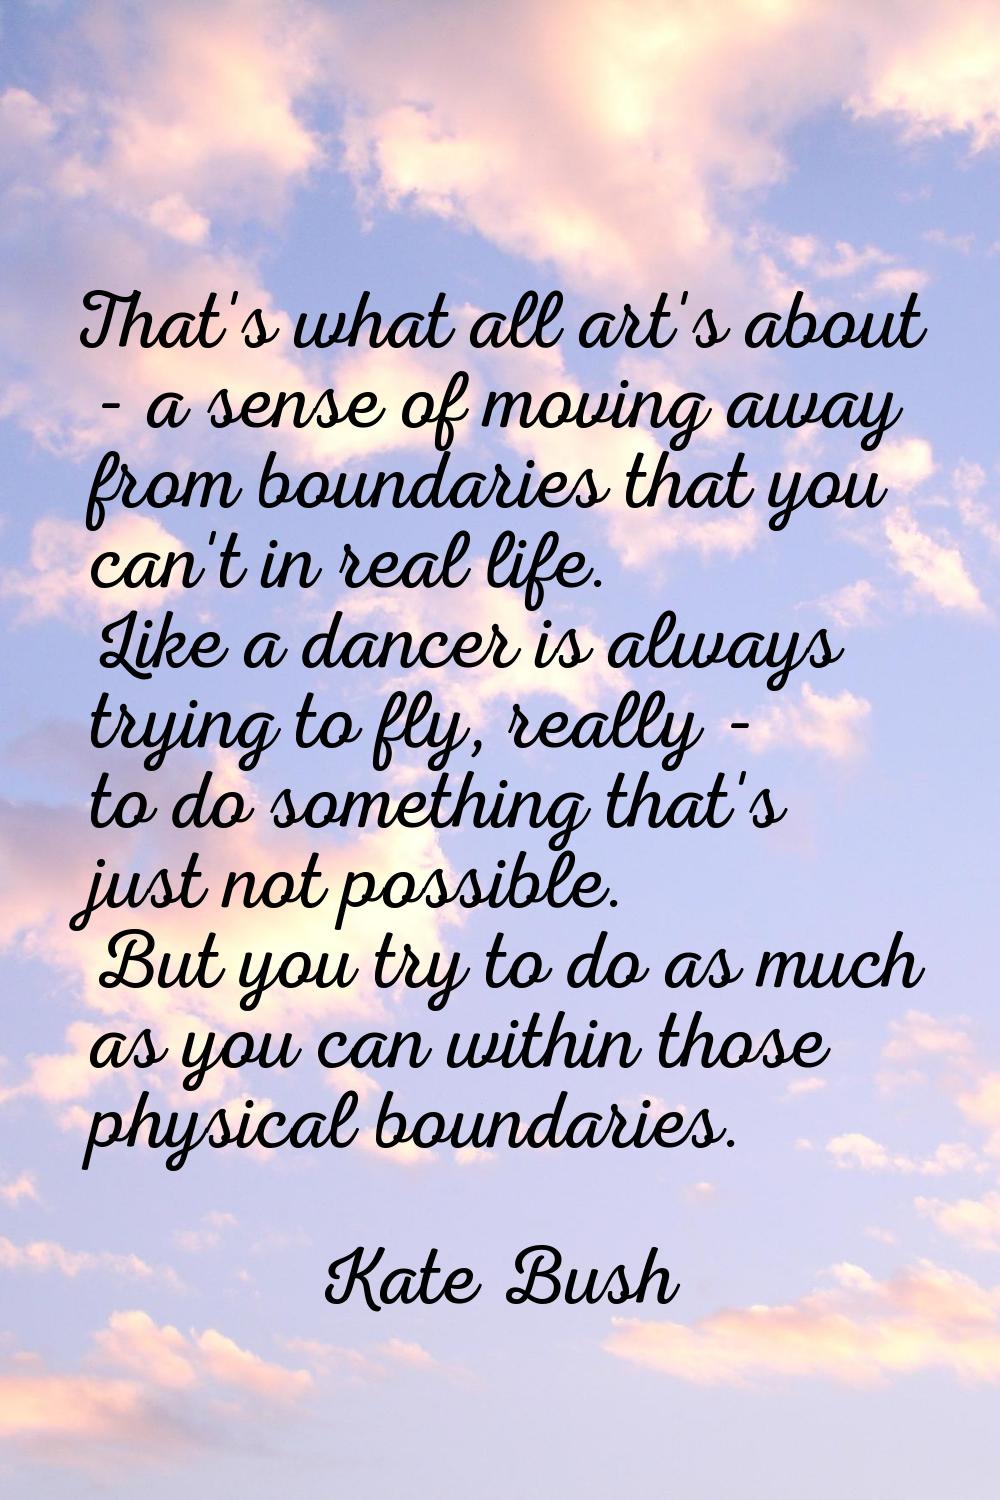 That's what all art's about - a sense of moving away from boundaries that you can't in real life. L